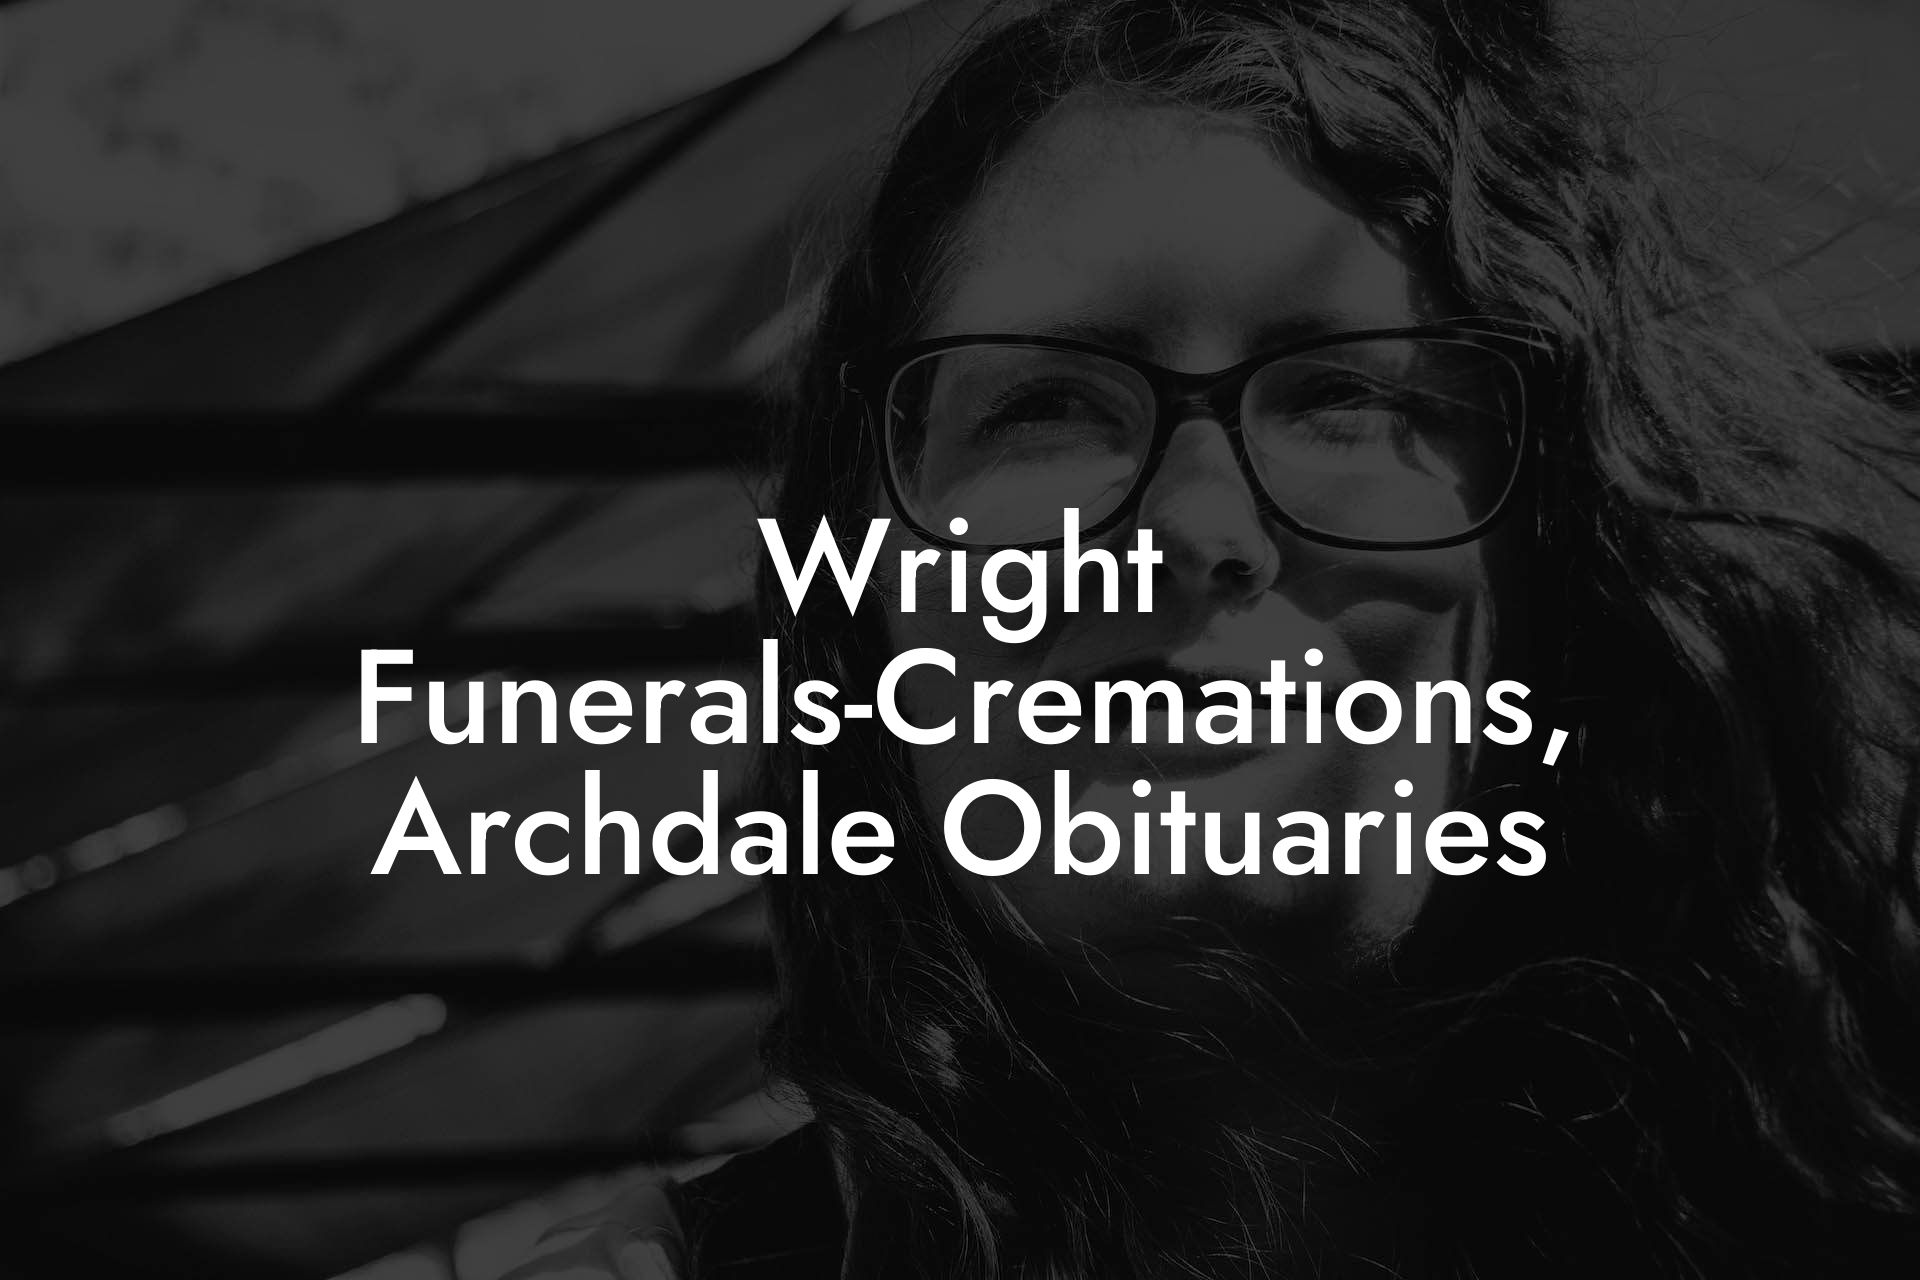 Wright Funerals-Cremations, Archdale Obituaries